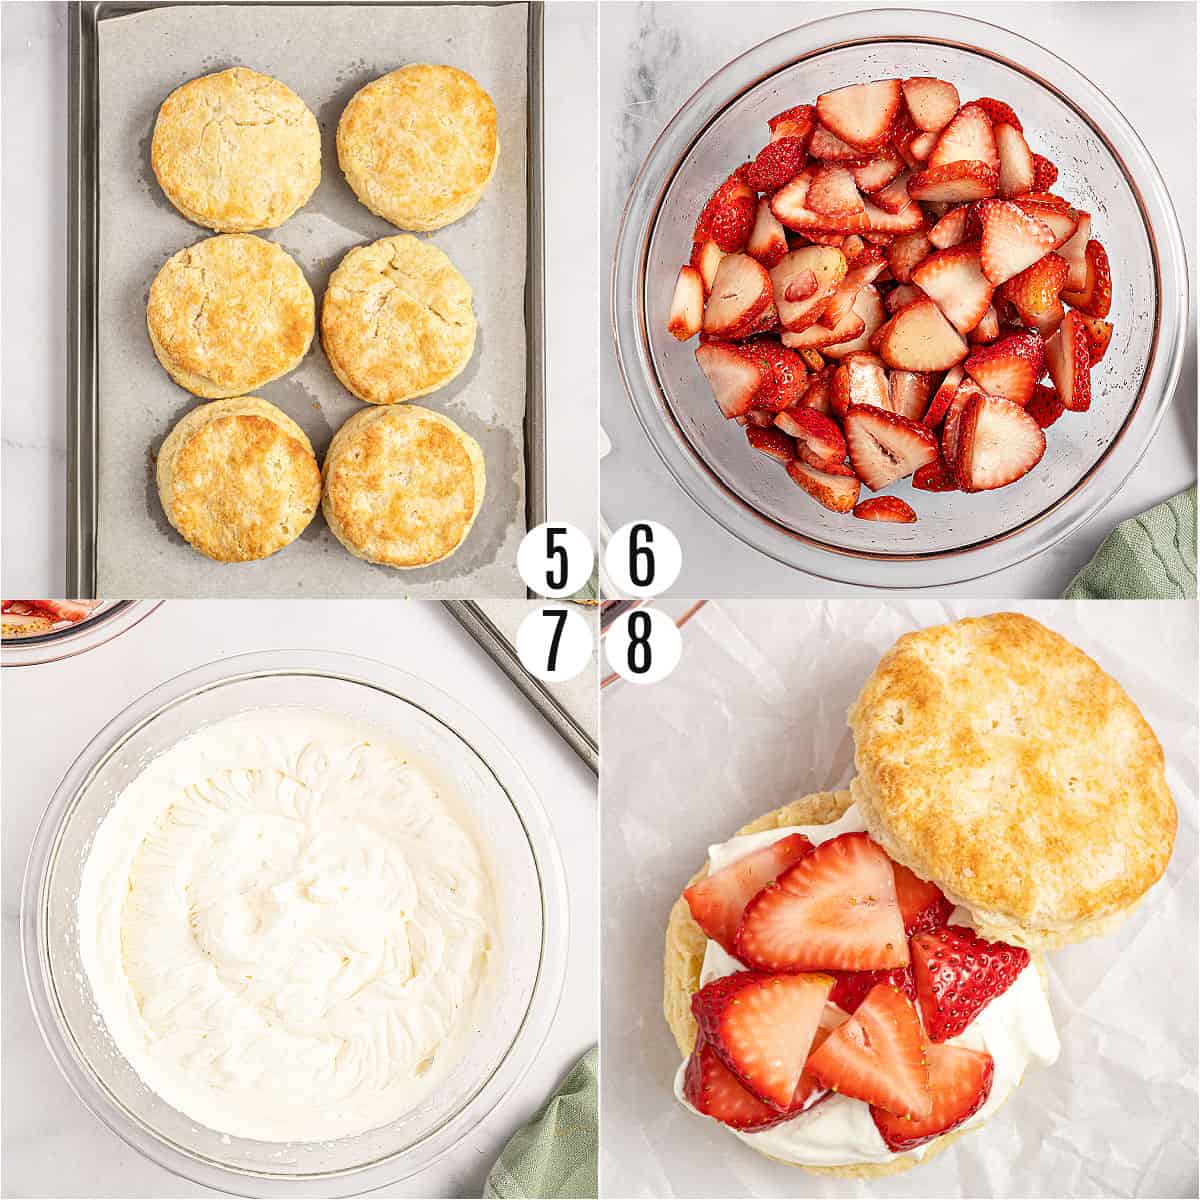 Step by step photos showing how to assemble strawberry shortcake.